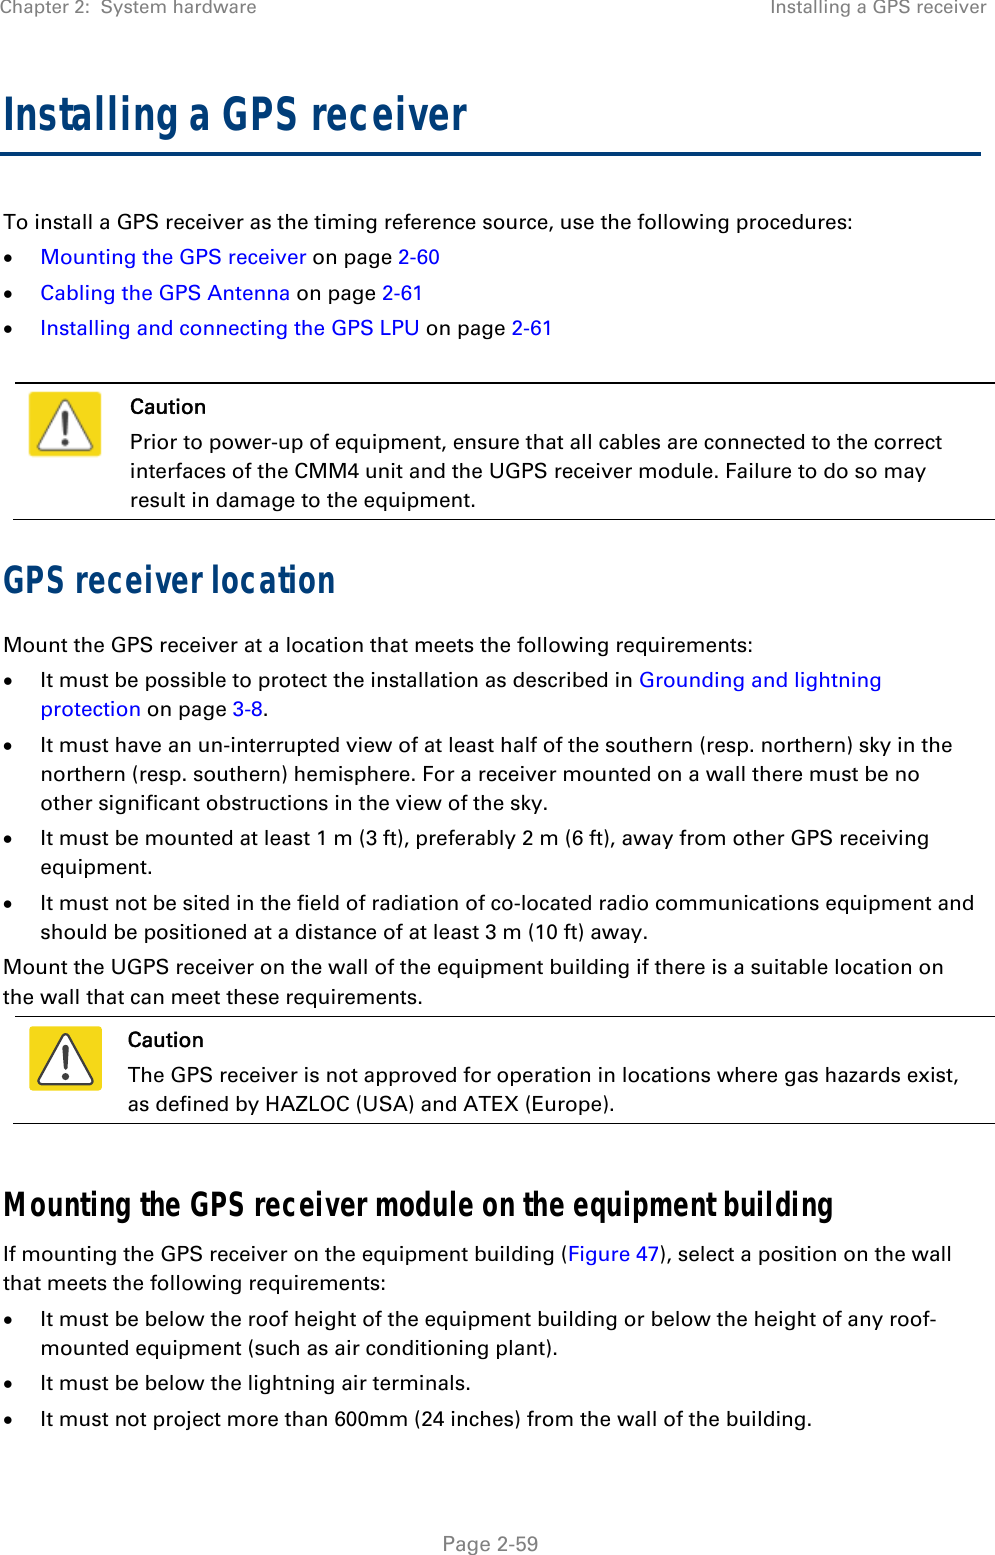 Chapter 2:  System hardware  Installing a GPS receiver   Page 2-59 Installing a GPS receiver  To install a GPS receiver as the timing reference source, use the following procedures:  Mounting the GPS receiver on page 2-60  Cabling the GPS Antenna on page 2-61  Installing and connecting the GPS LPU on page 2-61   Caution Prior to power-up of equipment, ensure that all cables are connected to the correct interfaces of the CMM4 unit and the UGPS receiver module. Failure to do so may result in damage to the equipment. GPS receiver location Mount the GPS receiver at a location that meets the following requirements:  It must be possible to protect the installation as described in Grounding and lightning protection on page 3-8.  It must have an un-interrupted view of at least half of the southern (resp. northern) sky in the northern (resp. southern) hemisphere. For a receiver mounted on a wall there must be no other significant obstructions in the view of the sky.  It must be mounted at least 1 m (3 ft), preferably 2 m (6 ft), away from other GPS receiving equipment.  It must not be sited in the field of radiation of co-located radio communications equipment and should be positioned at a distance of at least 3 m (10 ft) away. Mount the UGPS receiver on the wall of the equipment building if there is a suitable location on the wall that can meet these requirements.   Caution The GPS receiver is not approved for operation in locations where gas hazards exist, as defined by HAZLOC (USA) and ATEX (Europe).  Mounting the GPS receiver module on the equipment building If mounting the GPS receiver on the equipment building (Figure 47), select a position on the wall that meets the following requirements:  It must be below the roof height of the equipment building or below the height of any roof-mounted equipment (such as air conditioning plant).  It must be below the lightning air terminals.  It must not project more than 600mm (24 inches) from the wall of the building. 